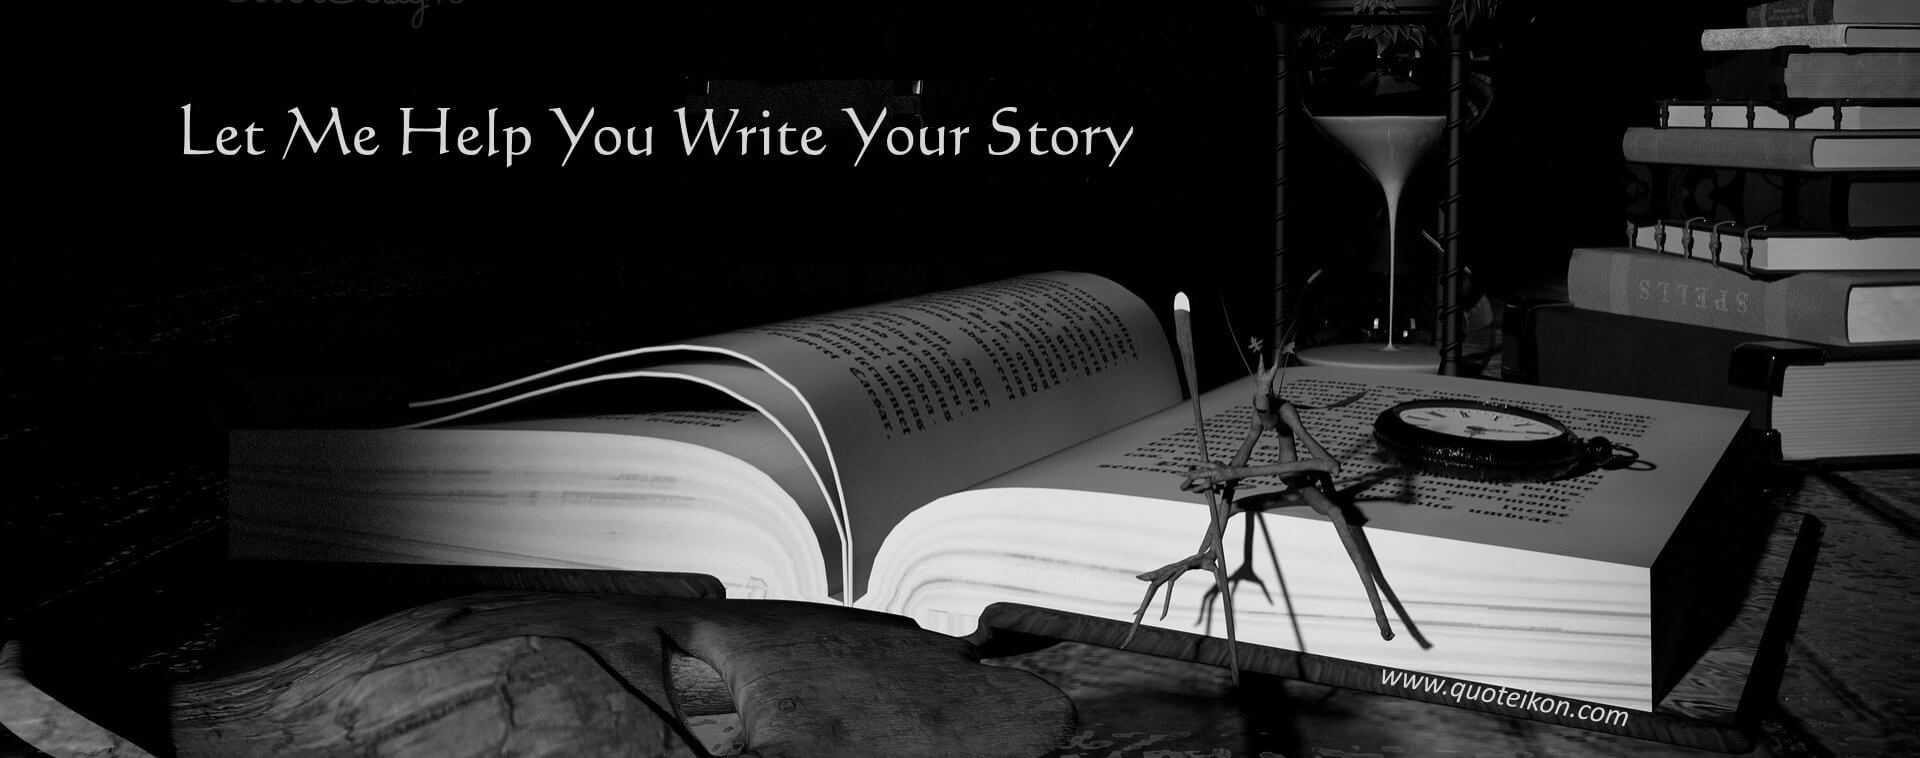 Let Me Help You Write Your Story